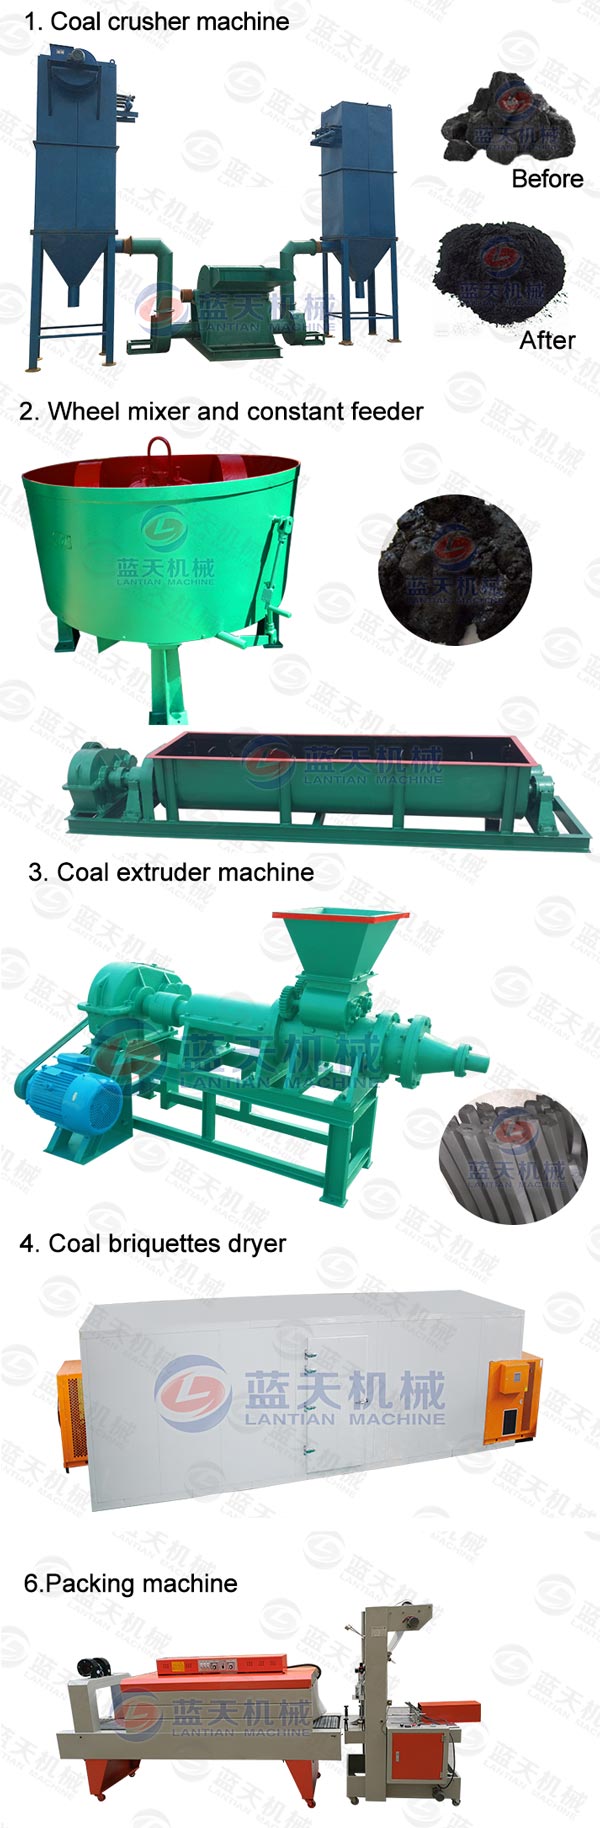 Producation process of coal extruder machine